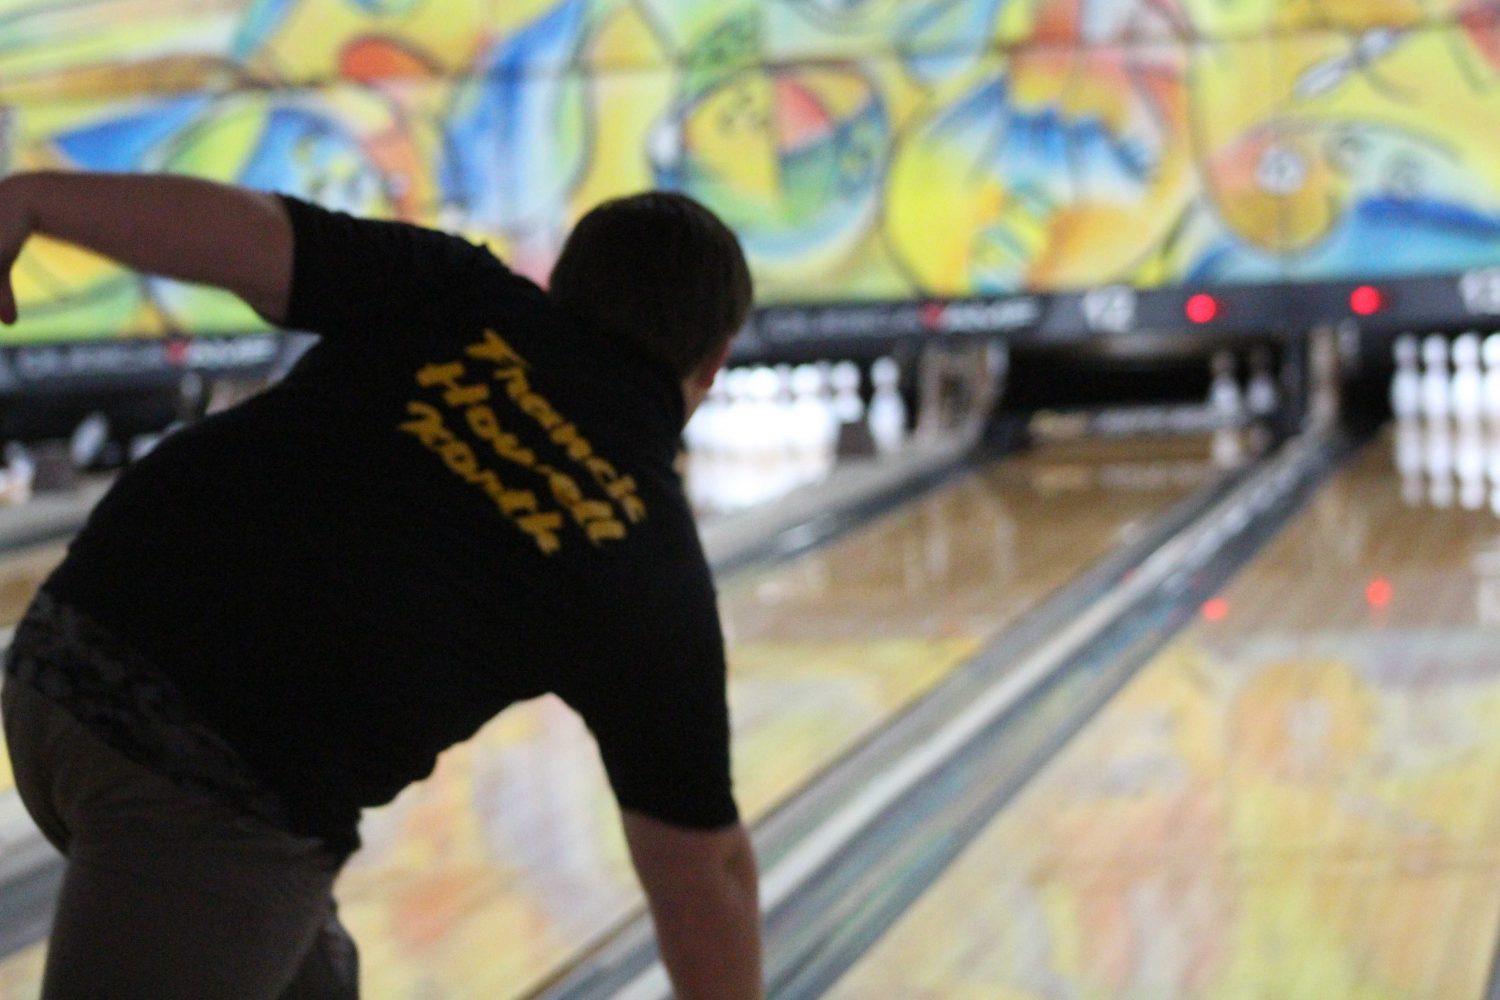 2-8 Bowling [Photo Gallery]